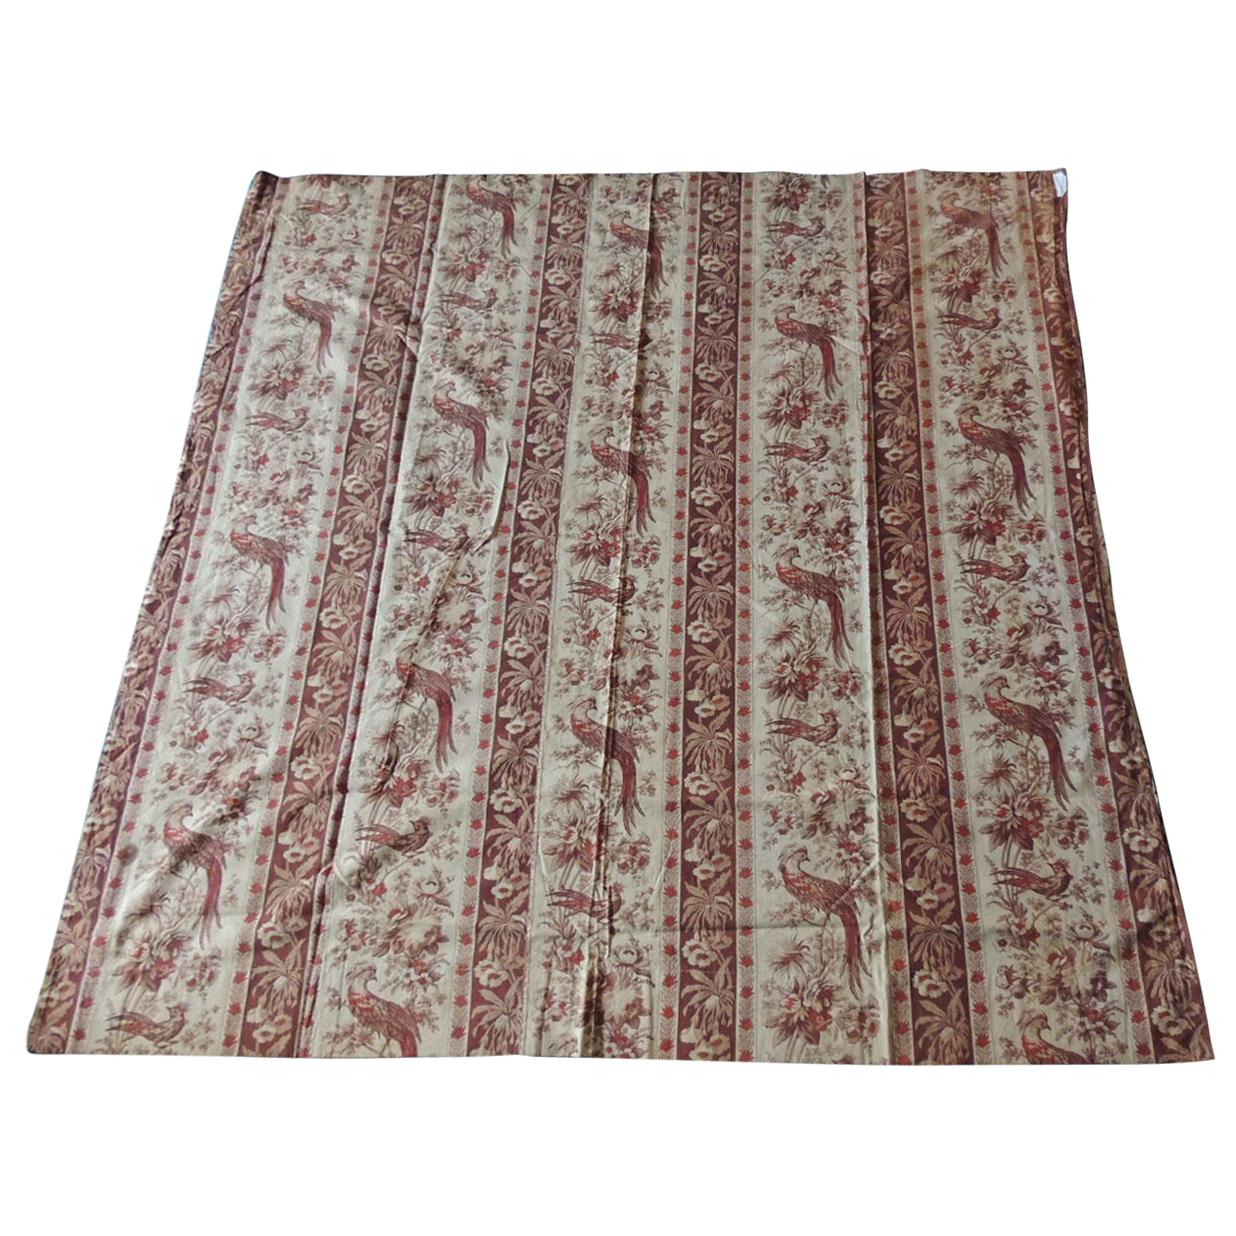 Antique Stripe Brown and Red Cotton Printed Textile Panel